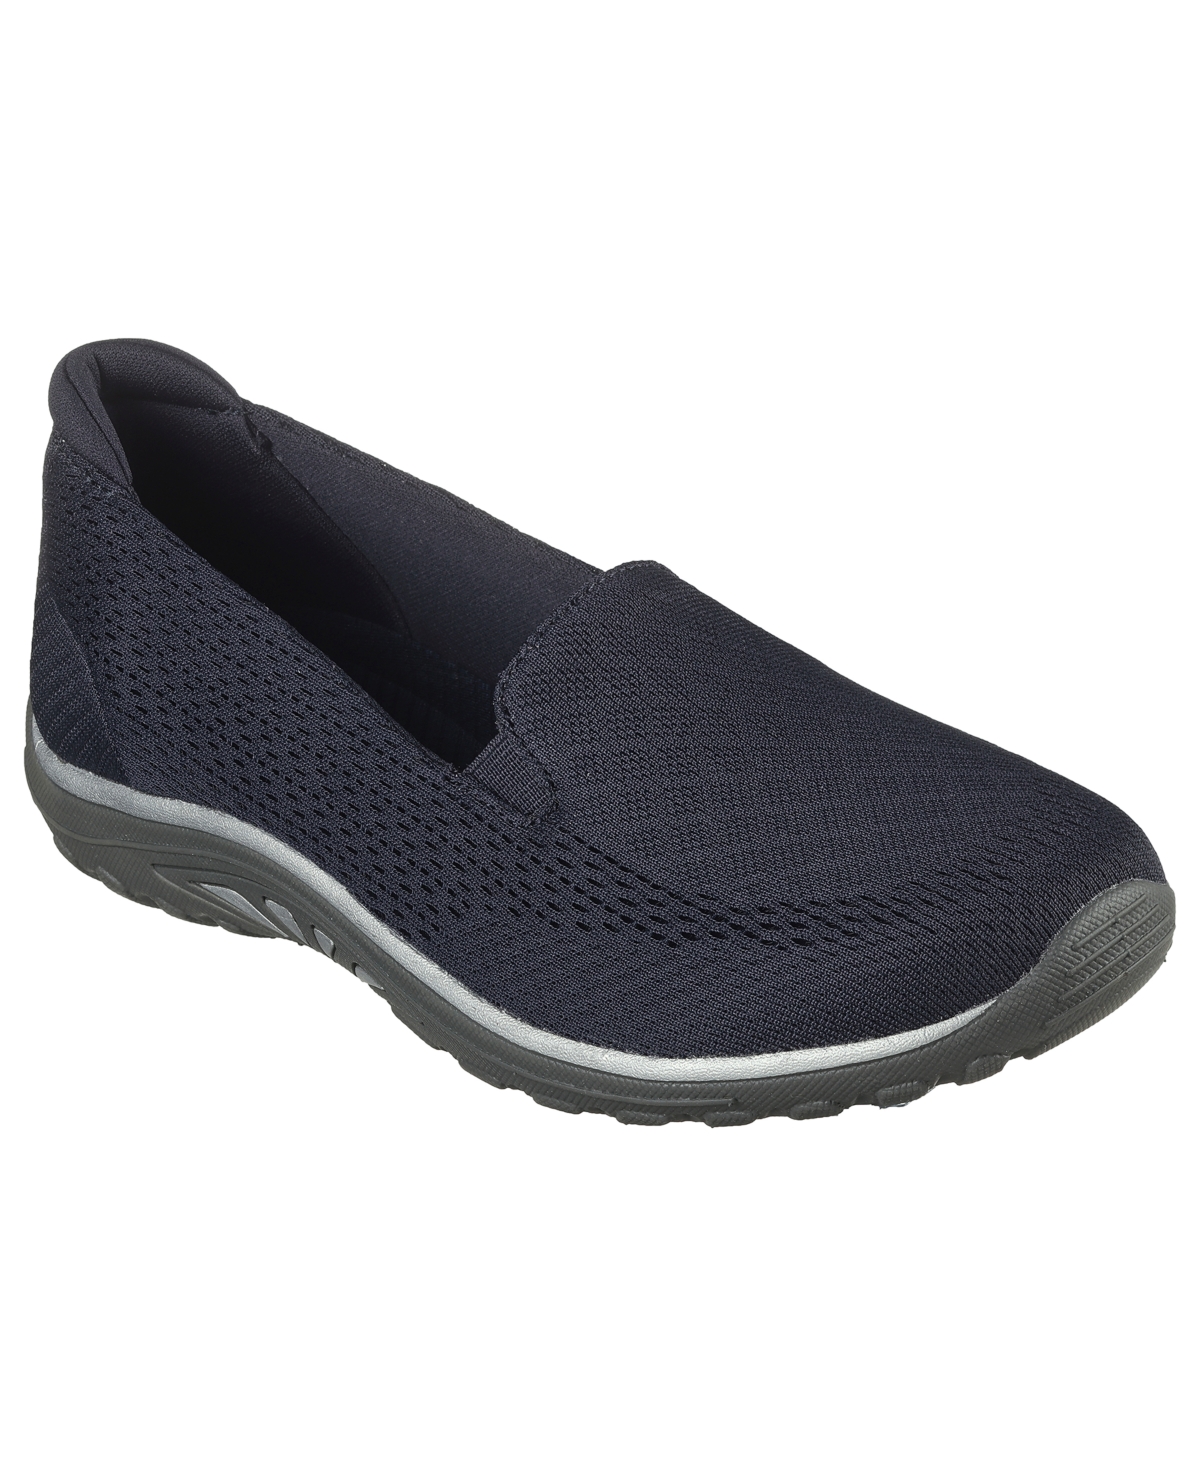 Women's Relaxed Fit Reggae Fest - Willows Vibe Slip-On Casual Walking Sneakers from Finish Line - Navy